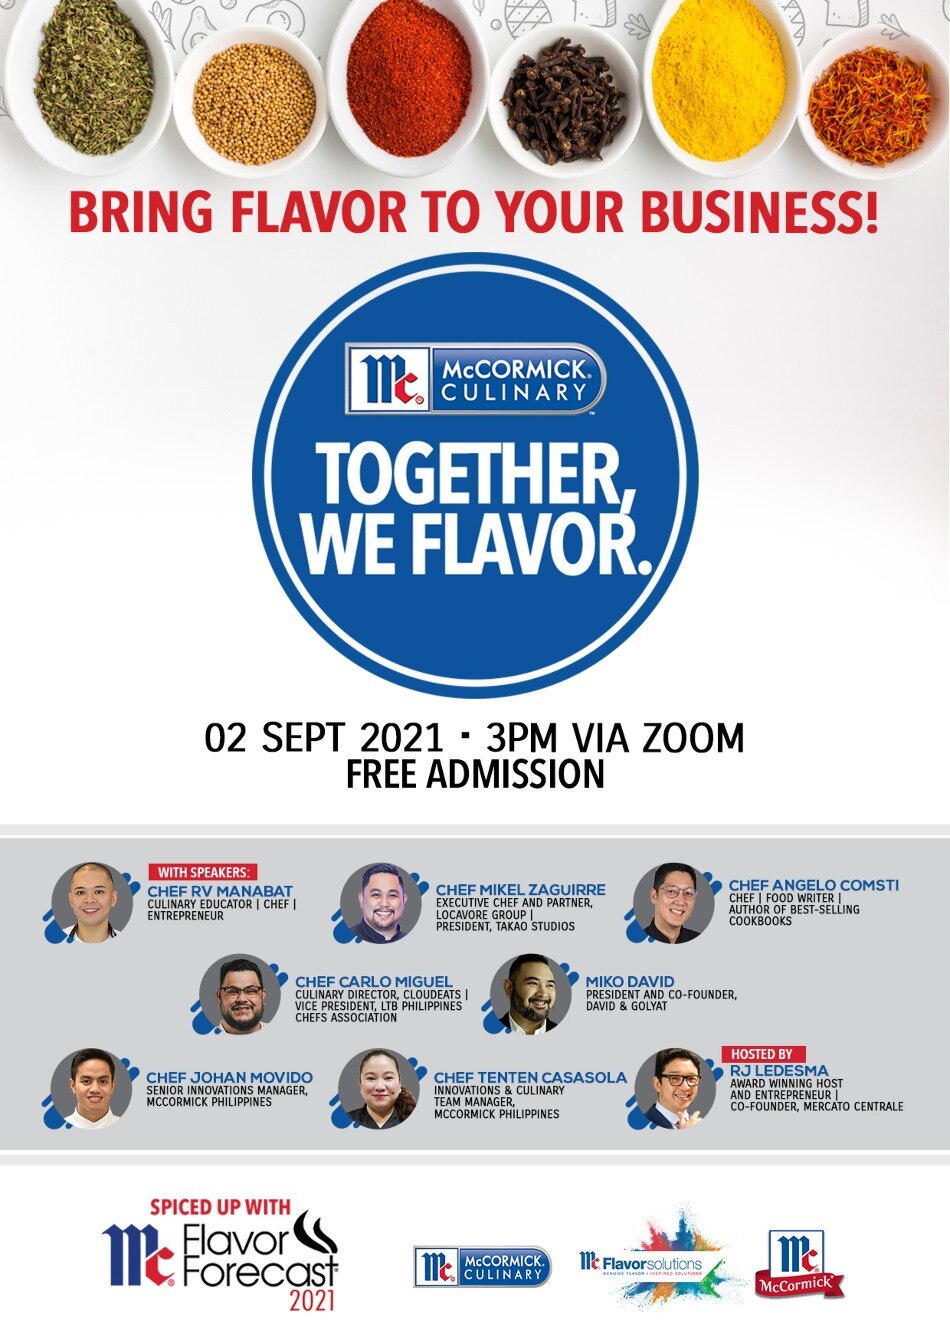 McCormick's Together, We Flavor webinar is helping entrepreneurs create sales-driving dishes and signature meals for their food businesses. Photo source: McCormick Facebook Page [LINK OUT: https://web.facebook.com/mccormickfriendsandflavor